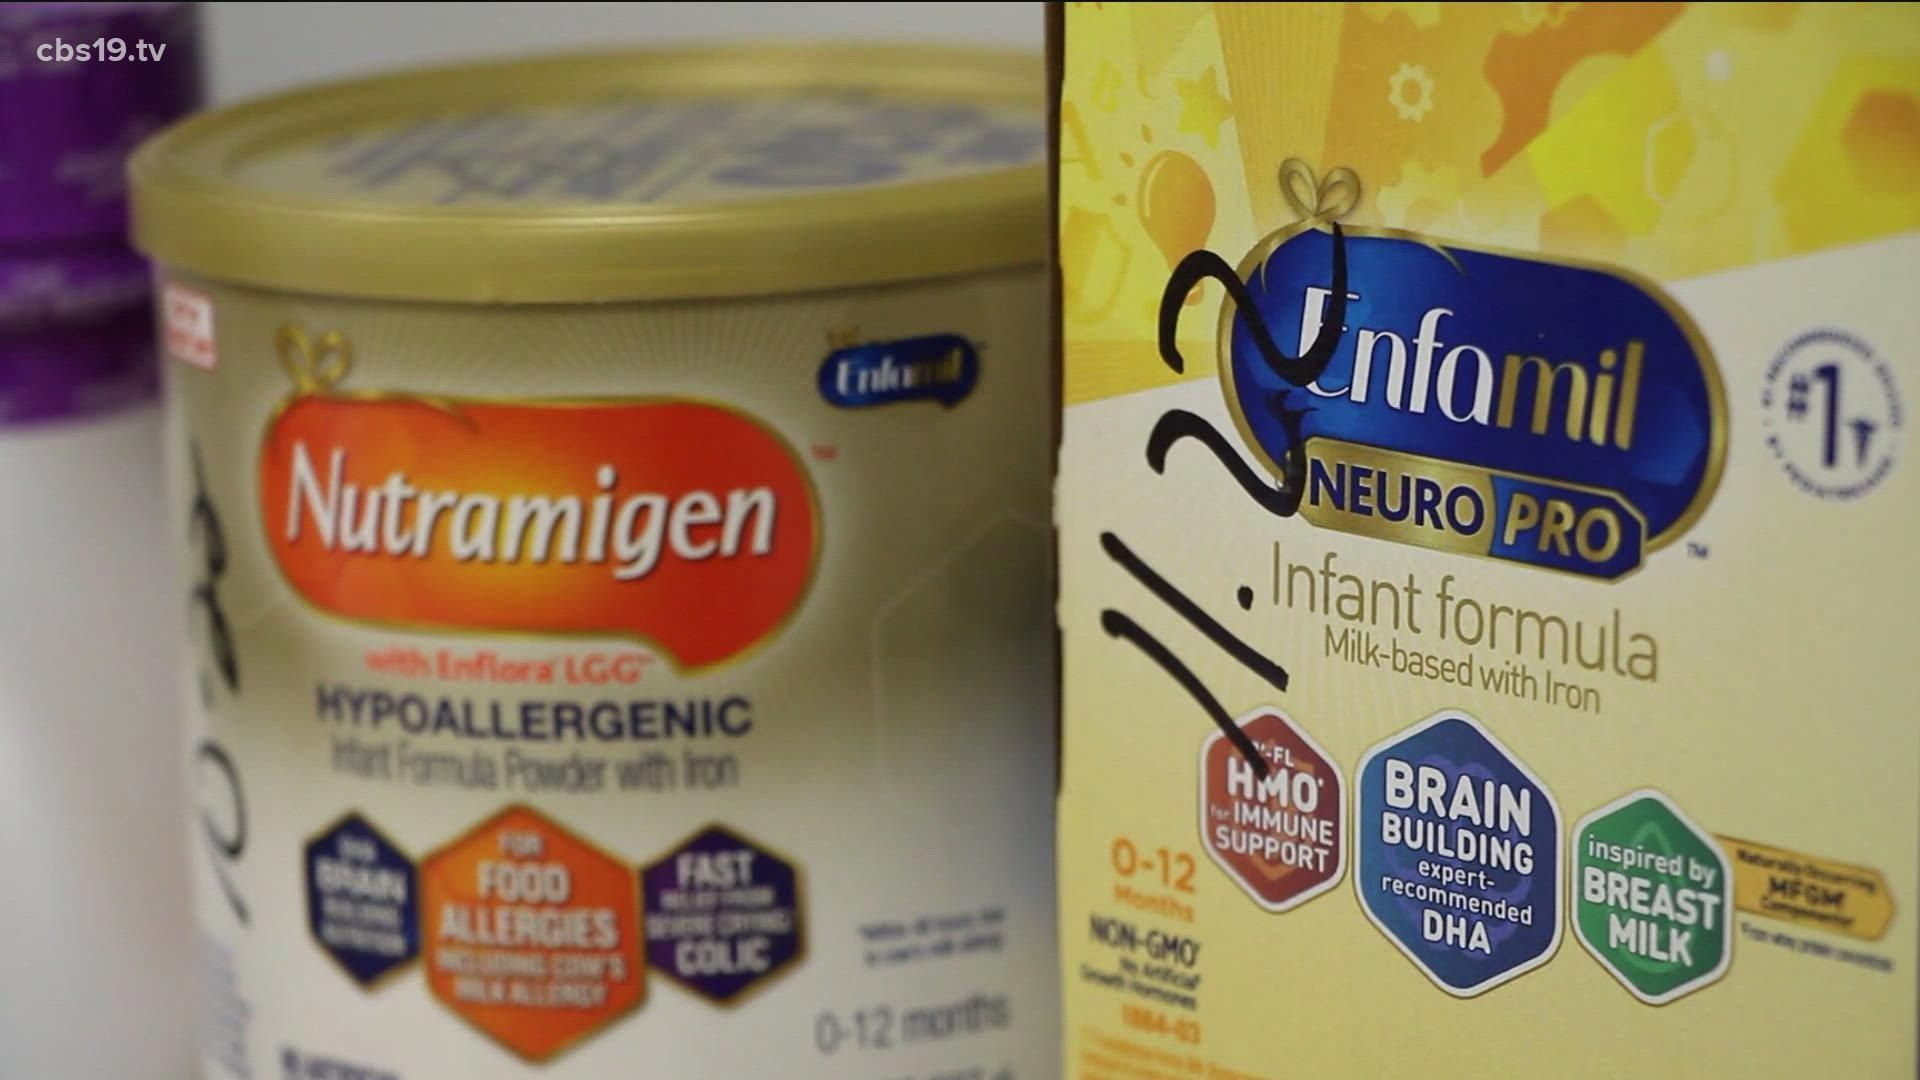 Parents are being warned about buying baby formula online cbs19